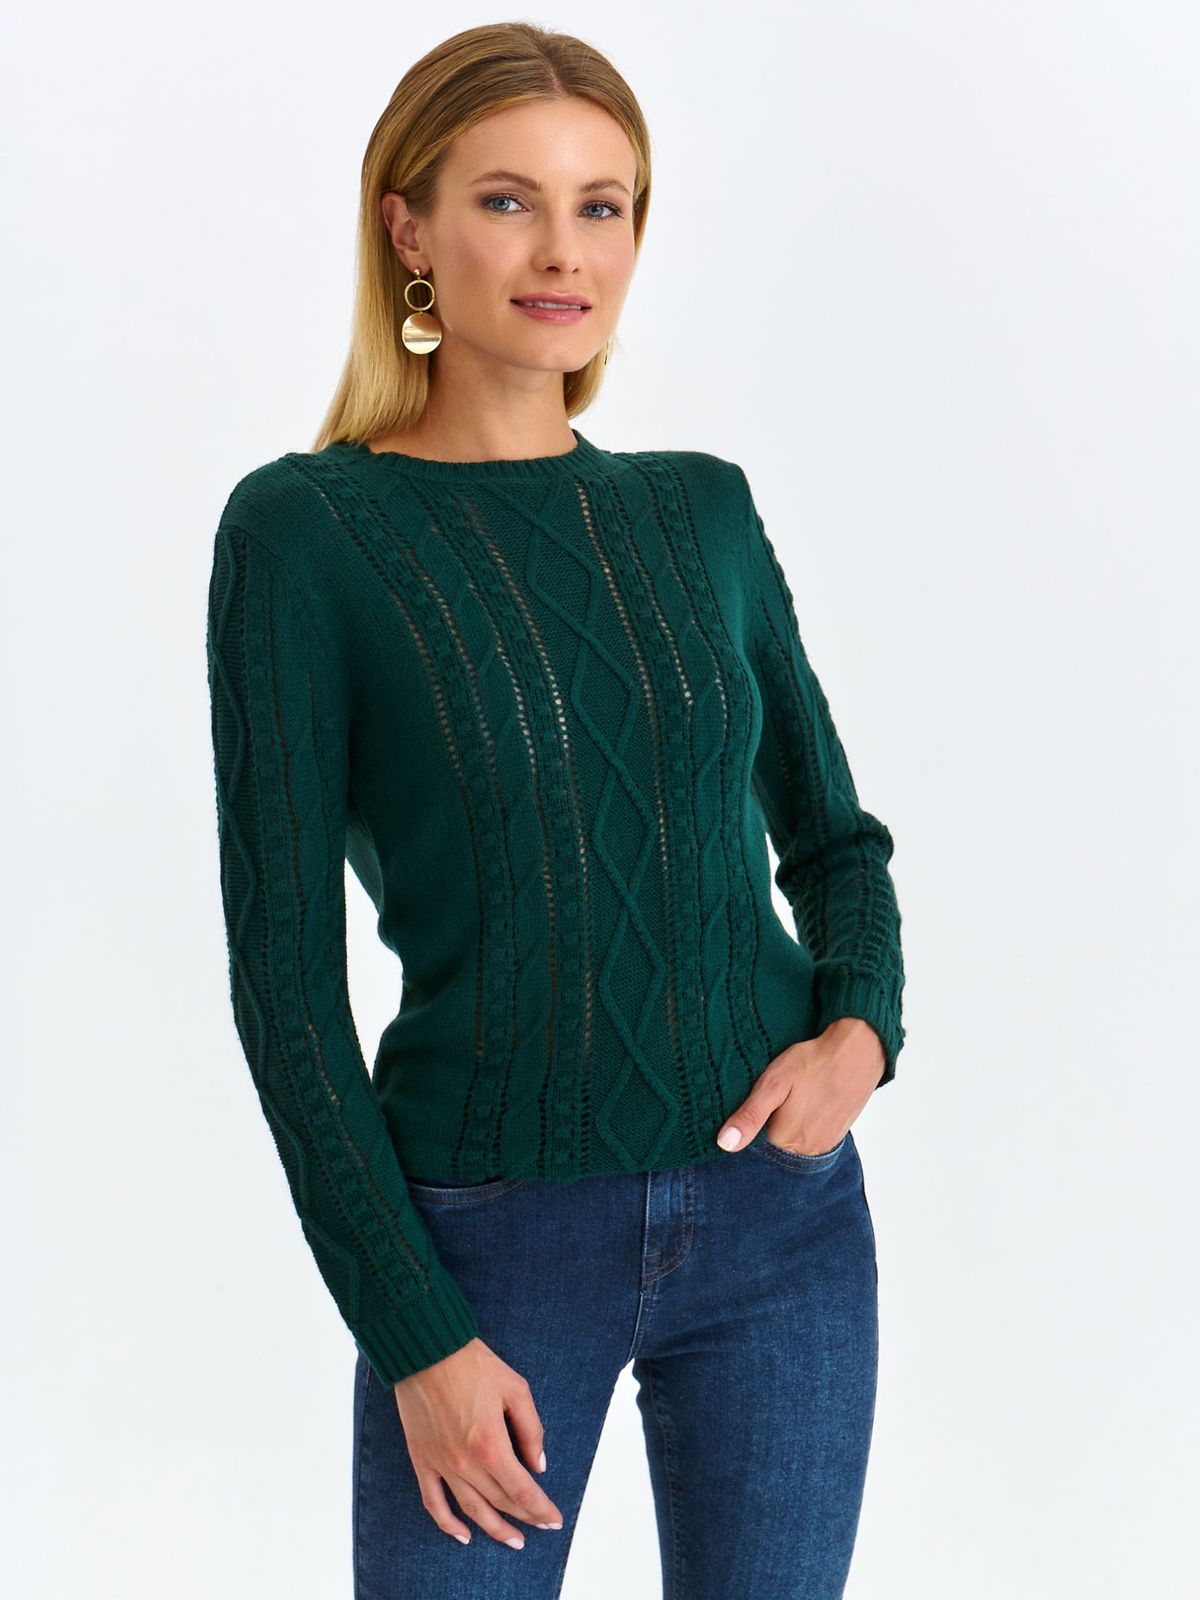 Green sweater knitted tented raised pattern